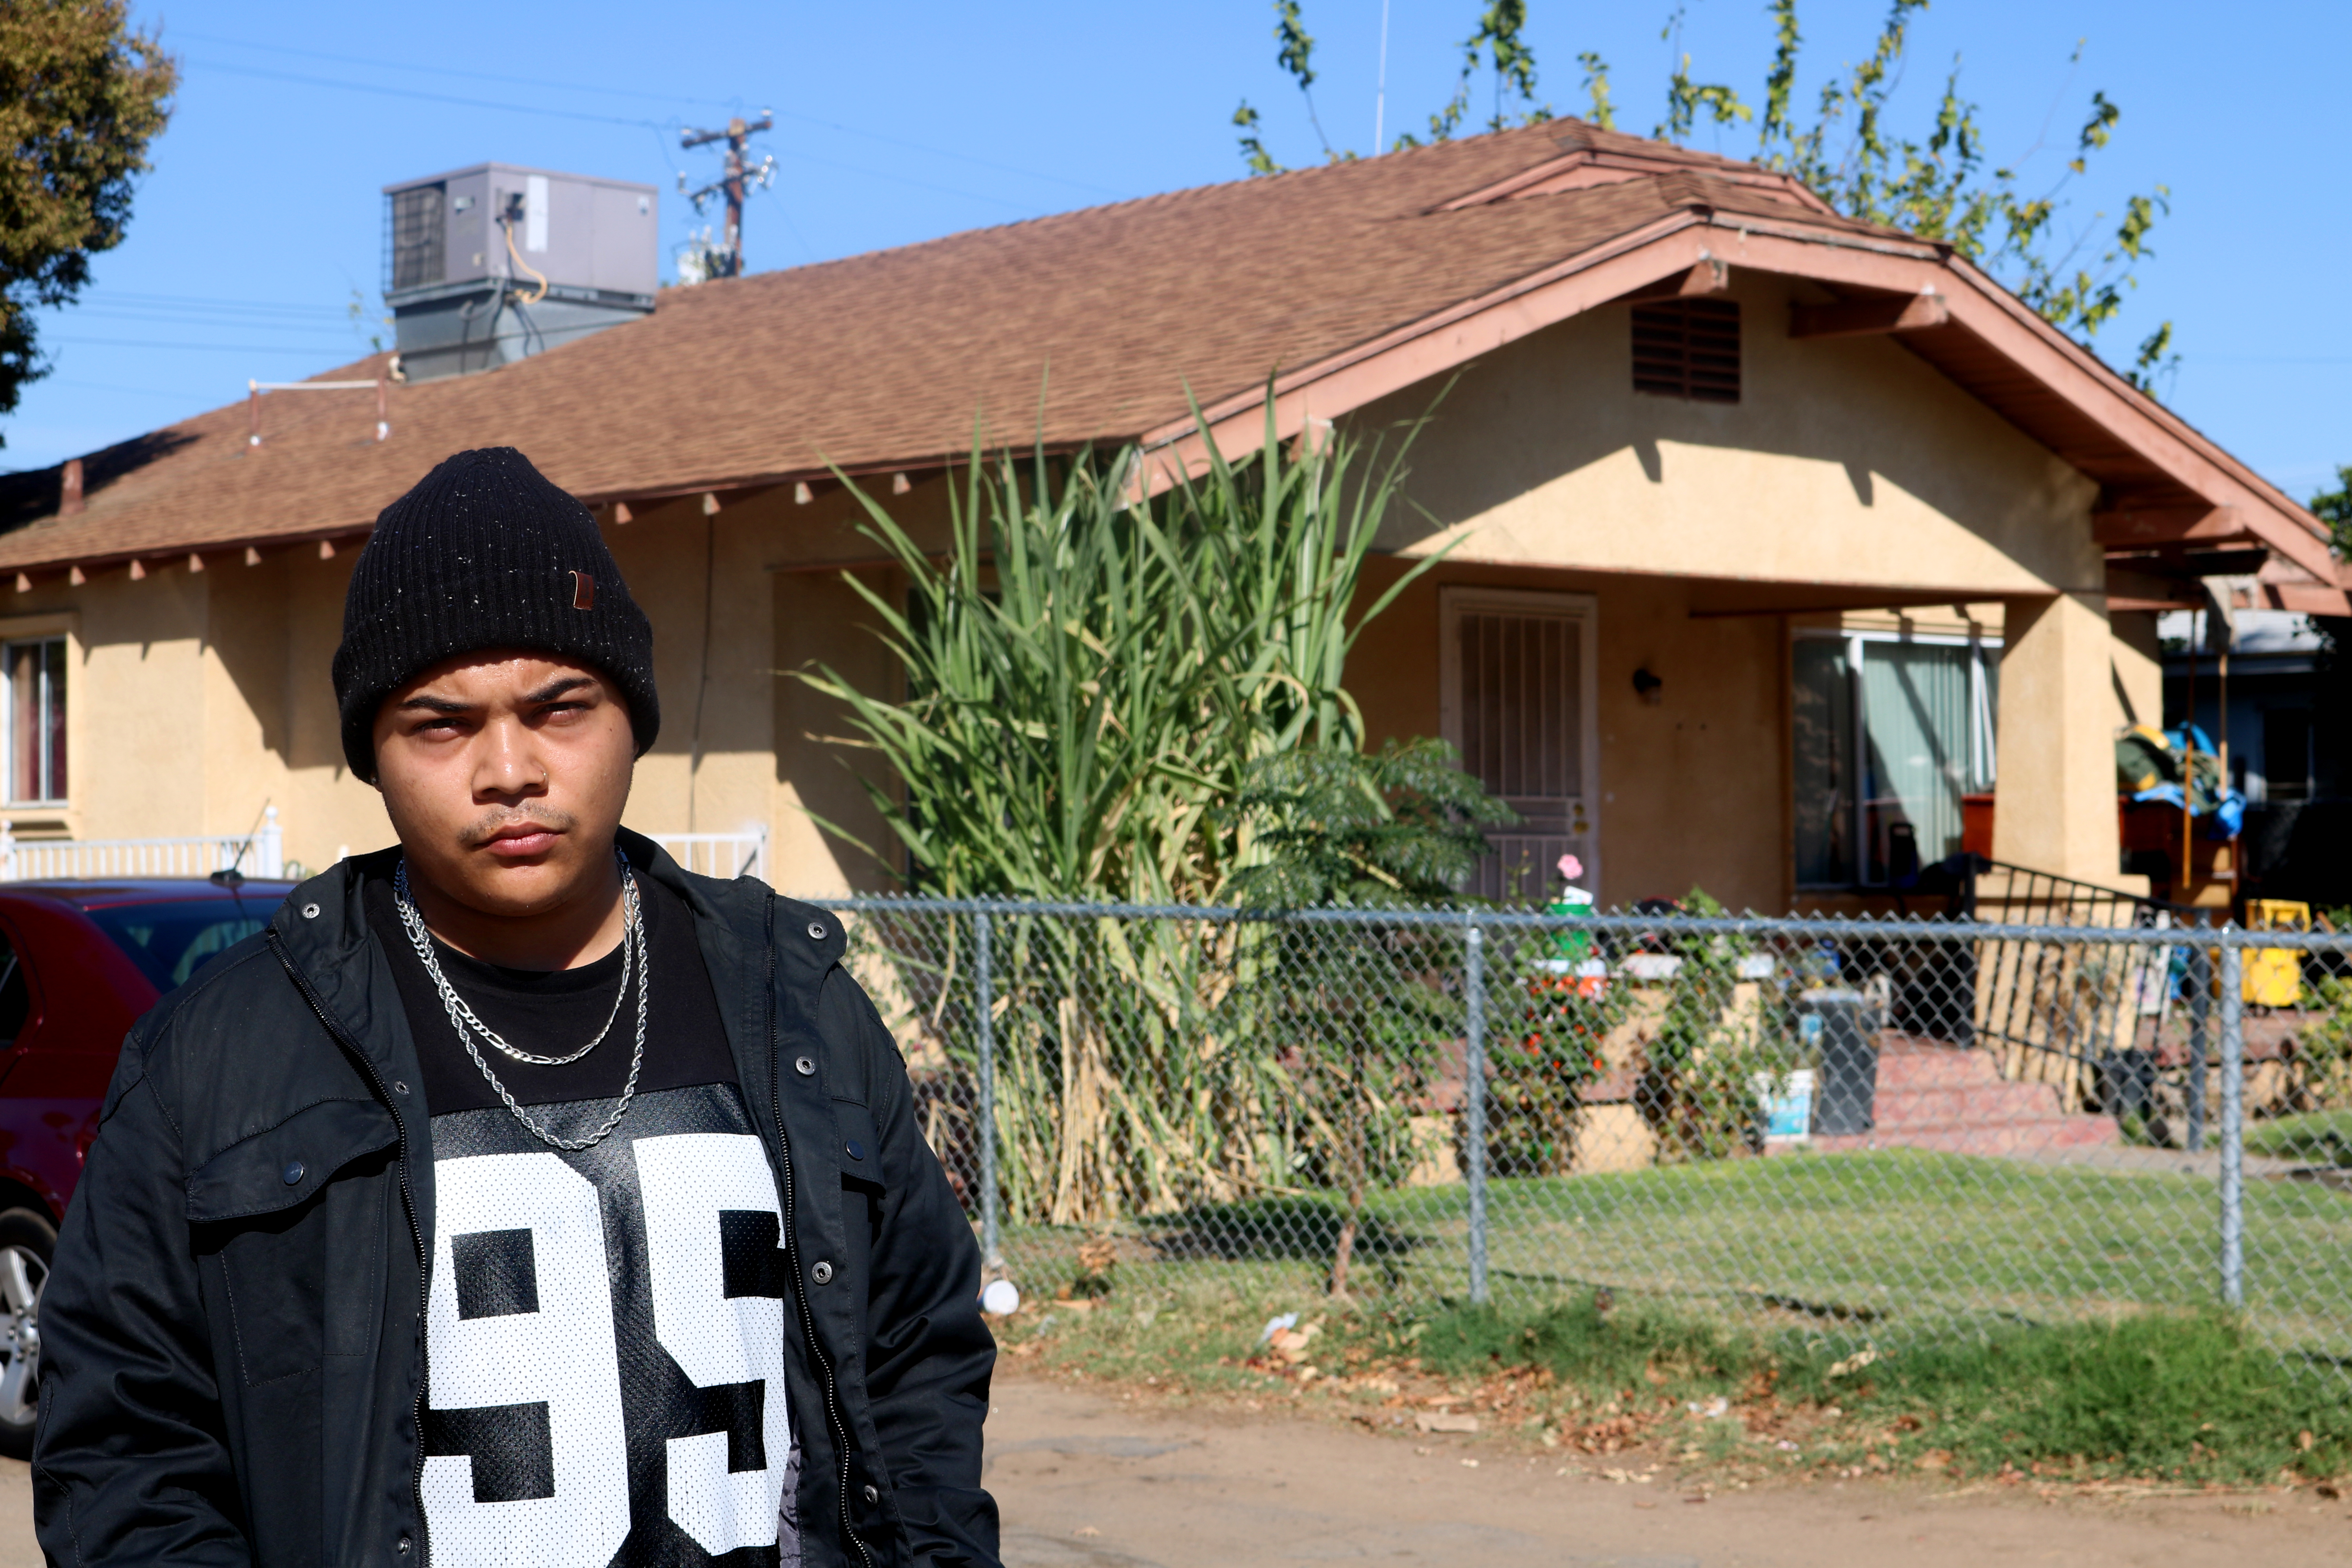 Reyna outside his childhood home. Among other renovations, what stood out most to him was the new paint and the fence around the property. 